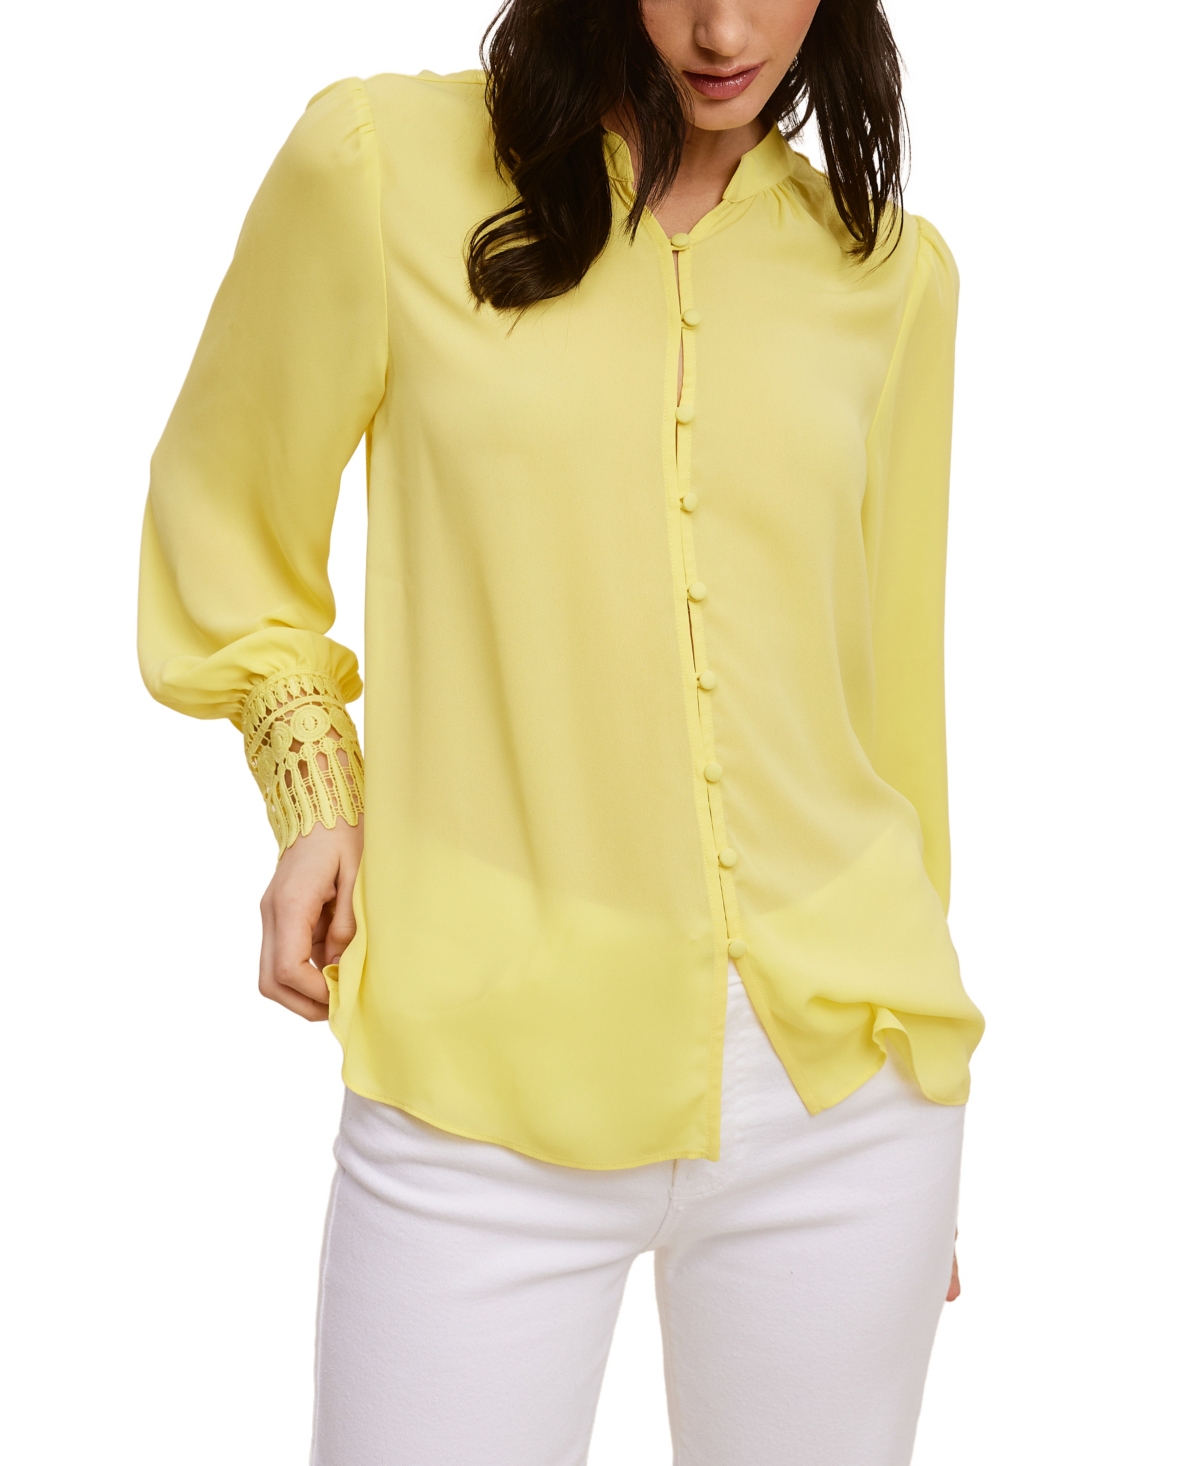 Solid Soft Crepe Blouse With Lace Cuff - YELLOW CREAM